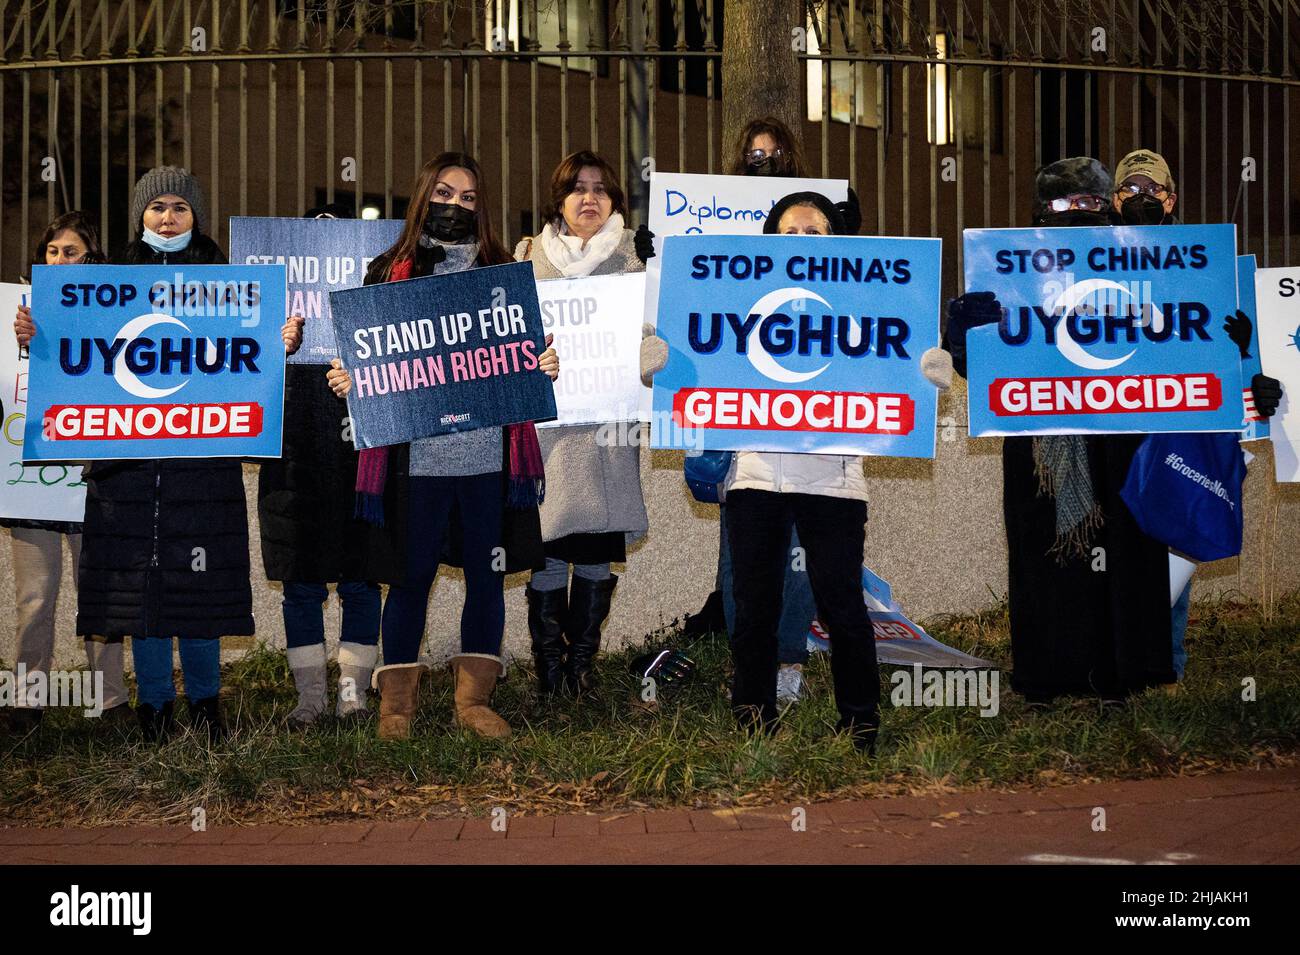 Washington, United States. 27th Jan, 2022. Protesters hold signs that say 'Stop China's Uyghur Genocide' and 'Stand up for Human Rights' at a protest at the Chinese Embassy against the Uyghur genocide and the Beijing Winter Olympics.The Uyghur Crisis Response Team of the Social Action Committee of Congregation Adas Israel in Washington, DC, sponsored the demonstration. Credit: SOPA Images Limited/Alamy Live News Stock Photo